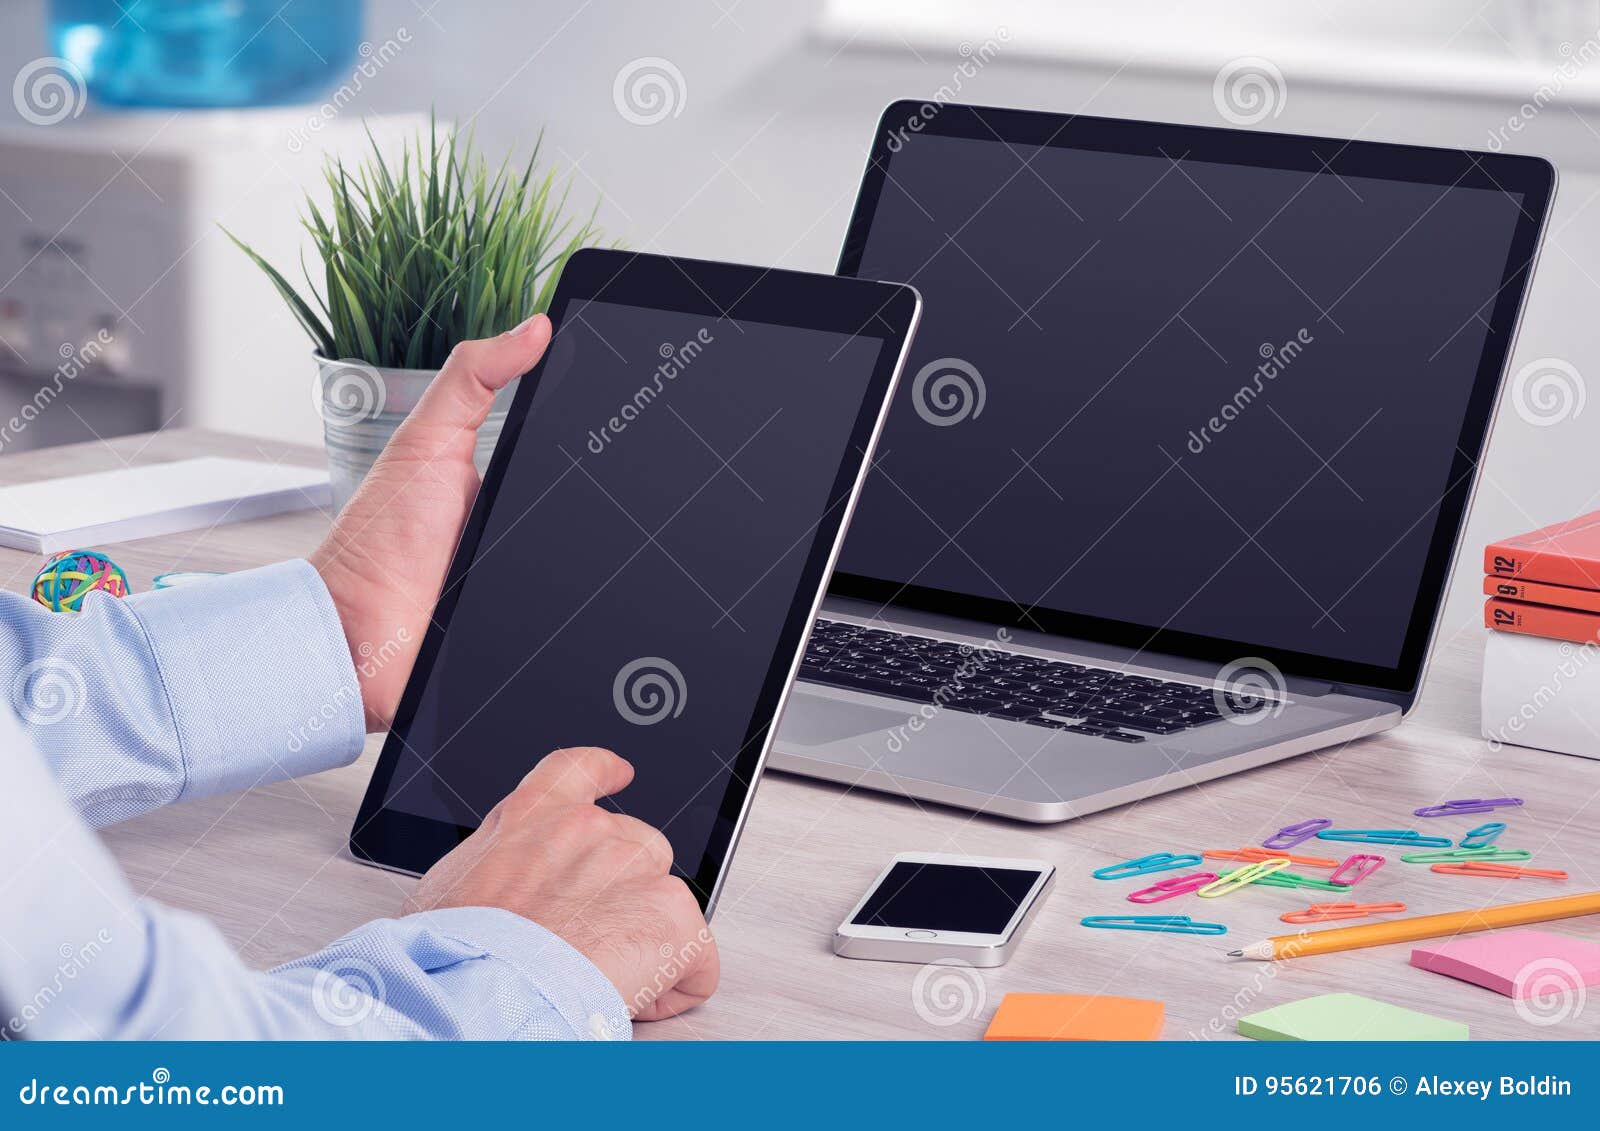 businessman using ipad digital tablet pc and macbook laptop on the office desk